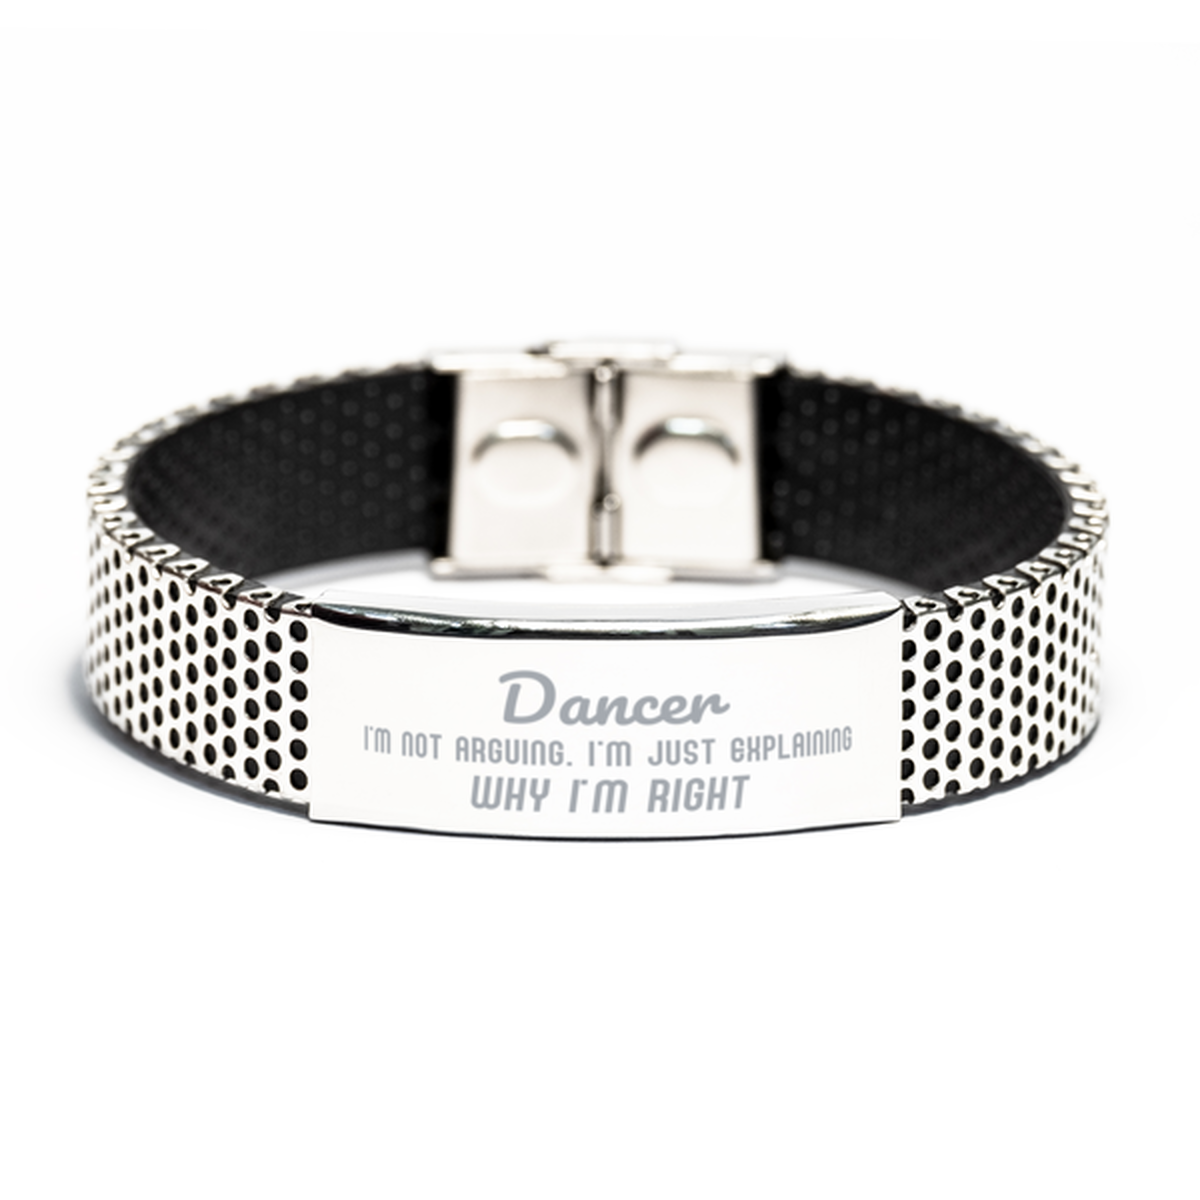 Dancer I'm not Arguing. I'm Just Explaining Why I'm RIGHT Stainless Steel Bracelet, Funny Saying Quote Dancer Gifts For Dancer Graduation Birthday Christmas Gifts for Men Women Coworker